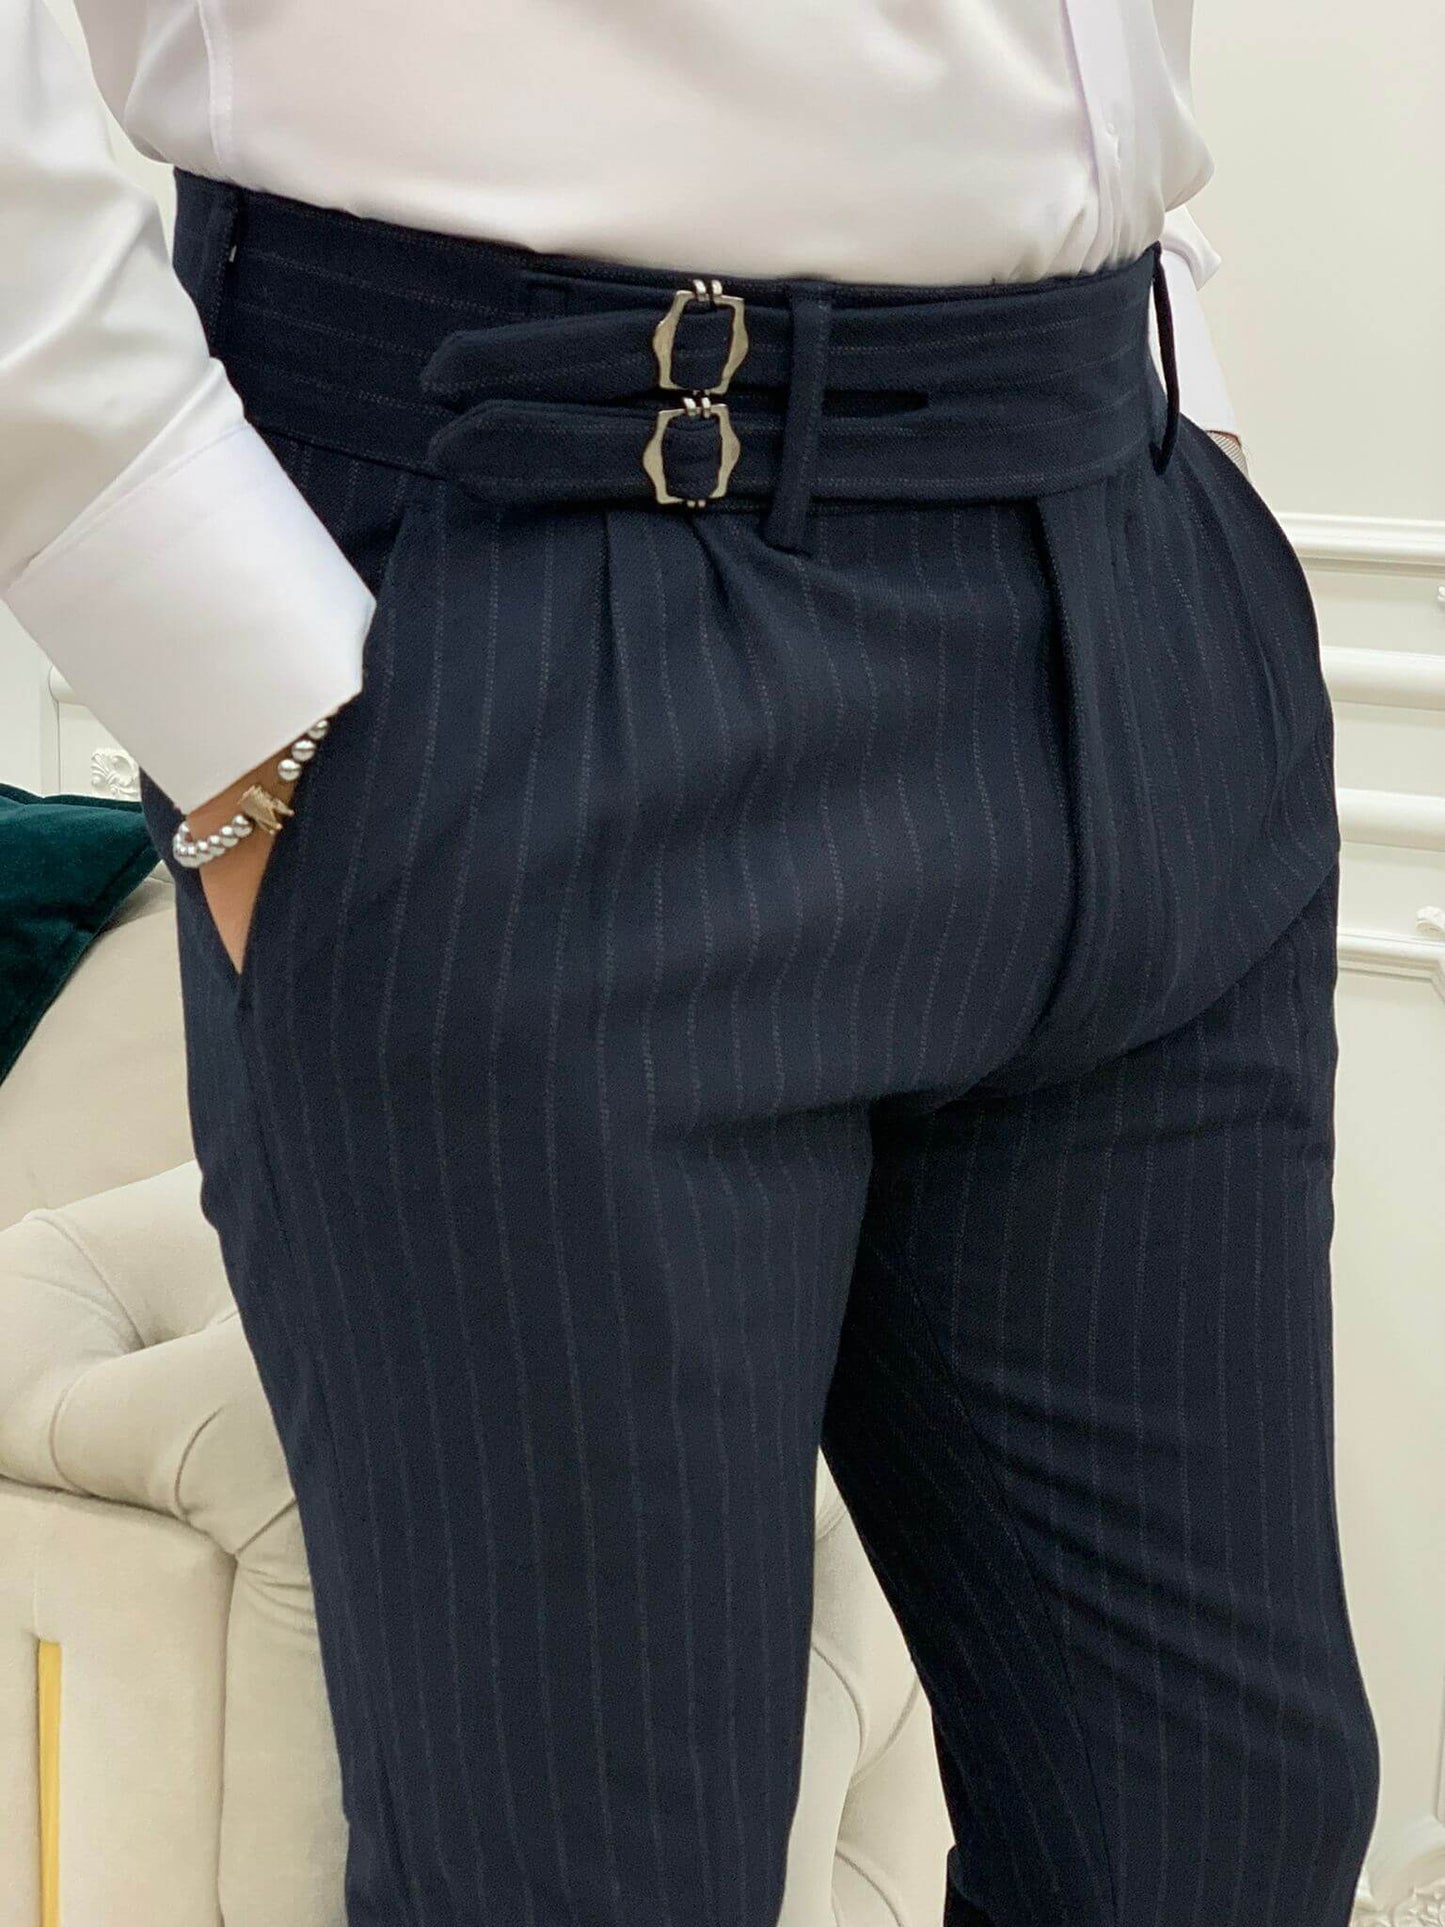 Navy blue striped pants with a stylish buckle detail